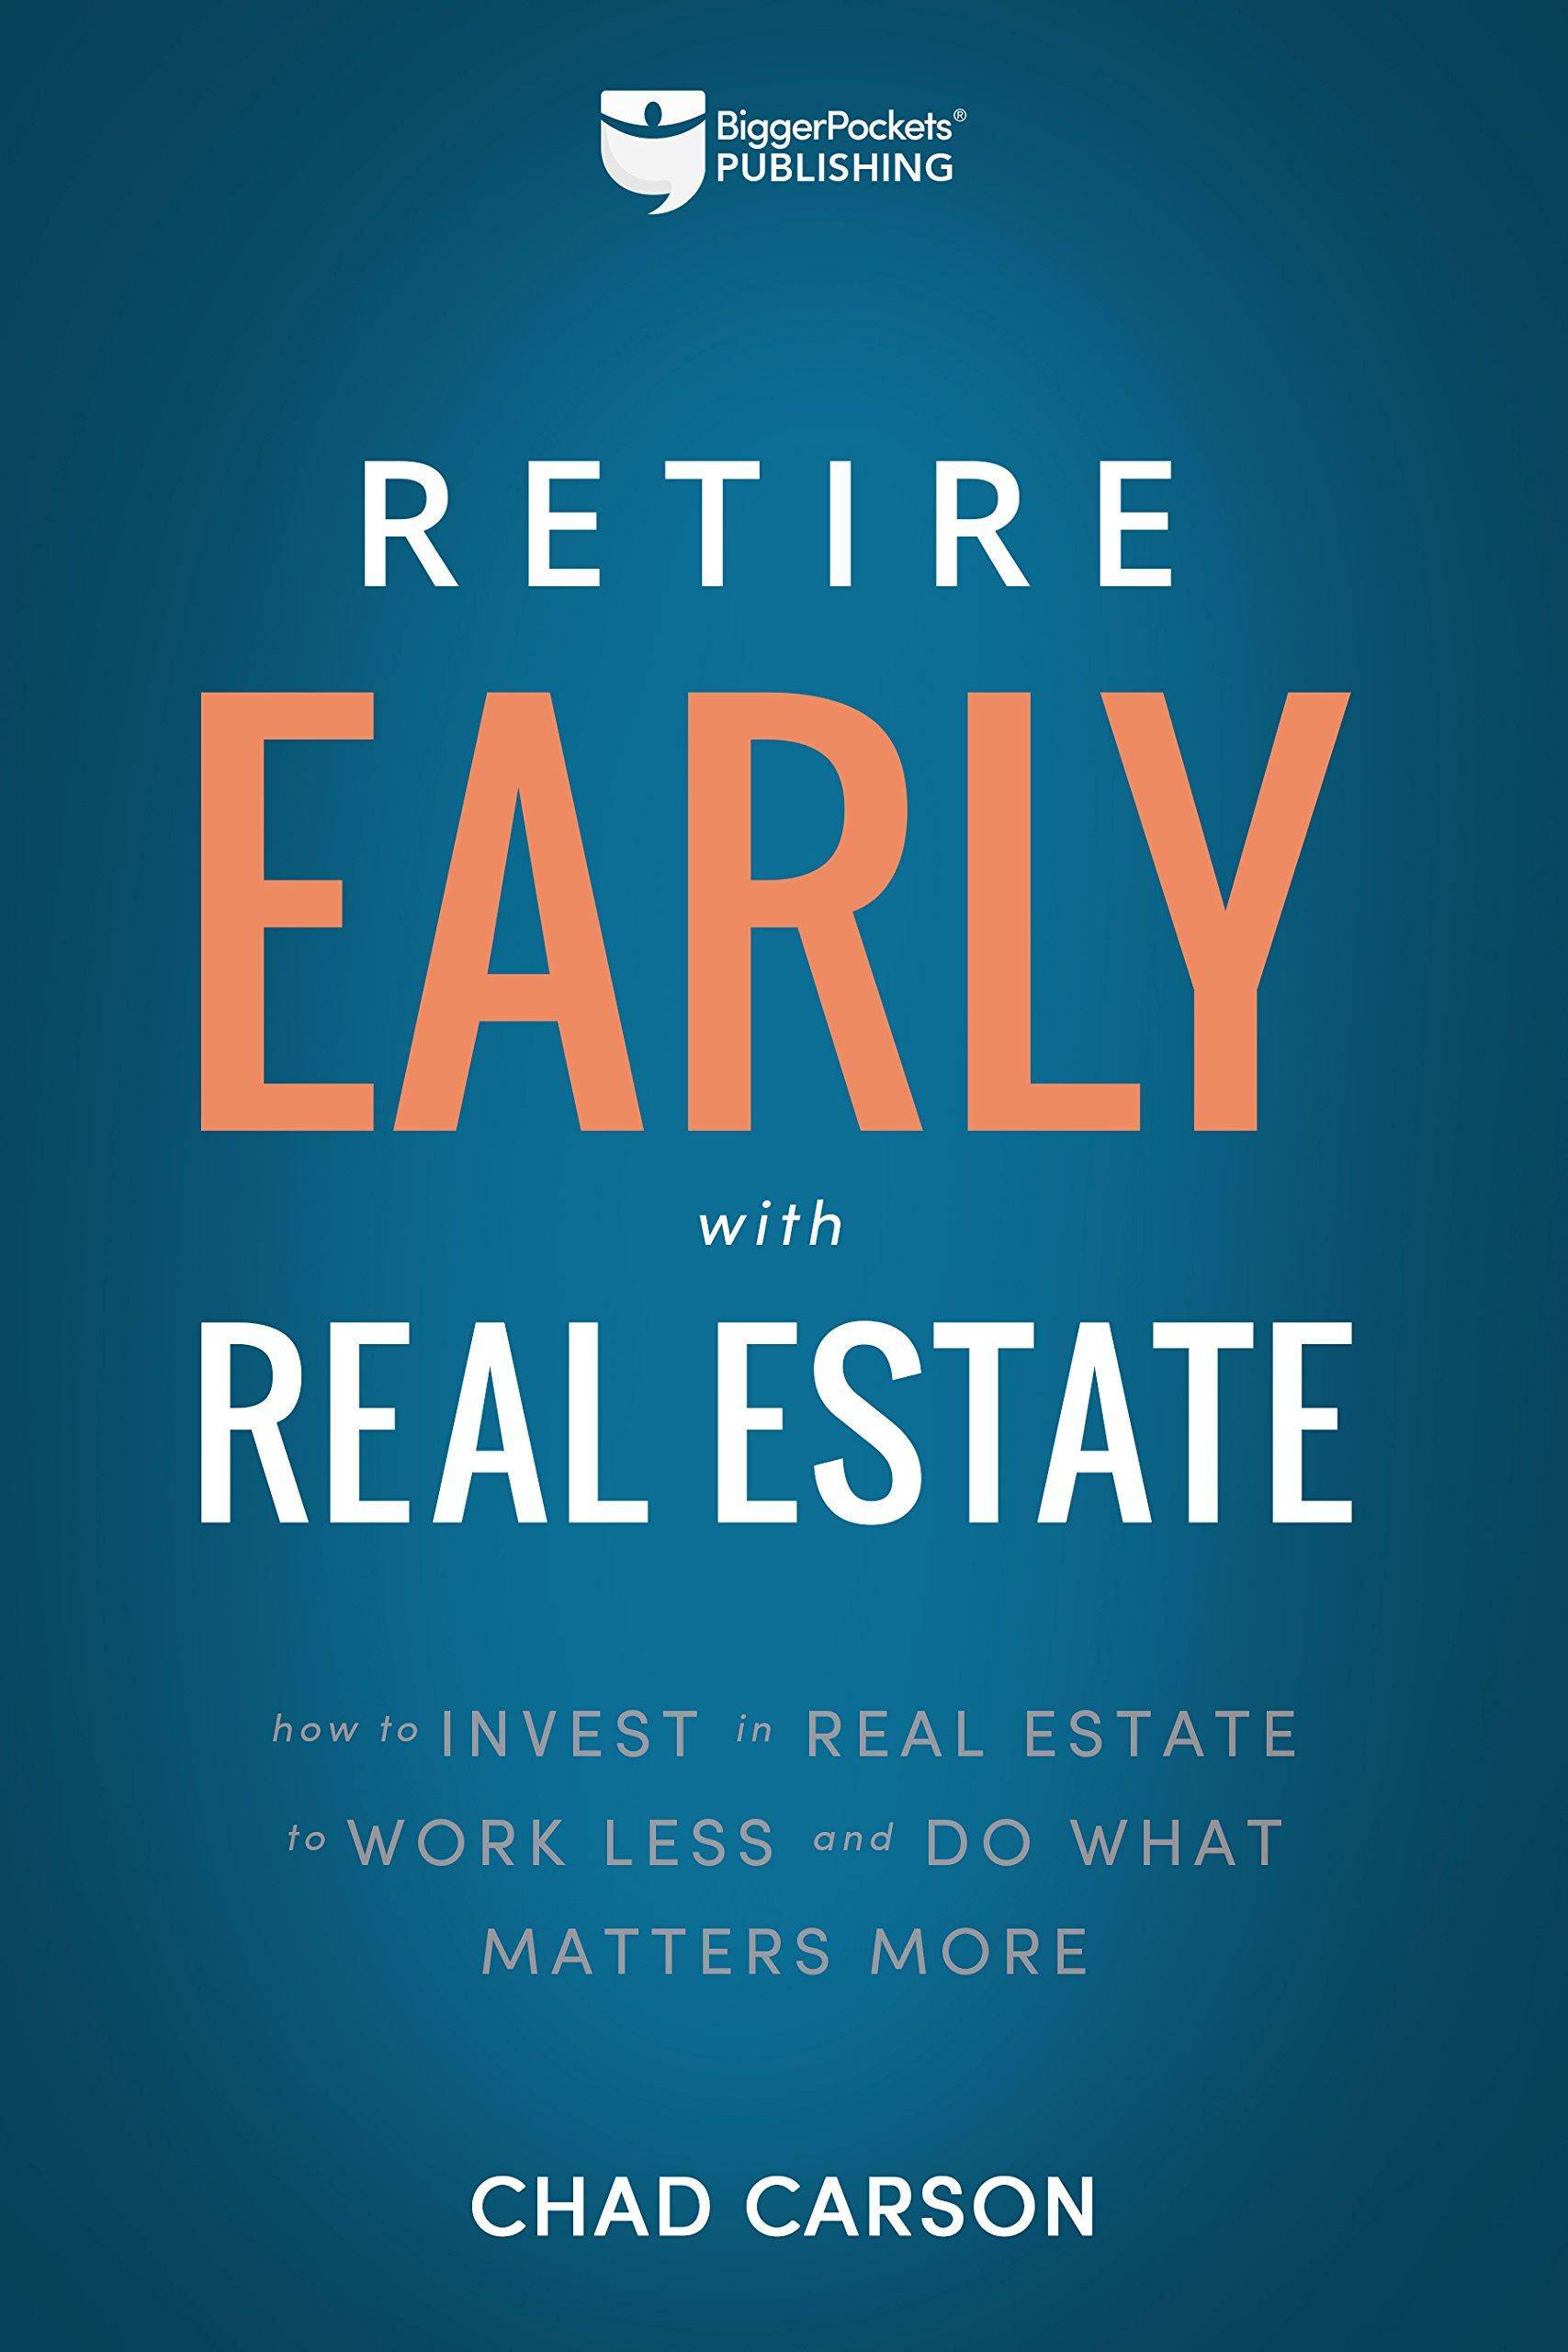 Retire Early With Real Estate - SureShot Books Publishing LLC